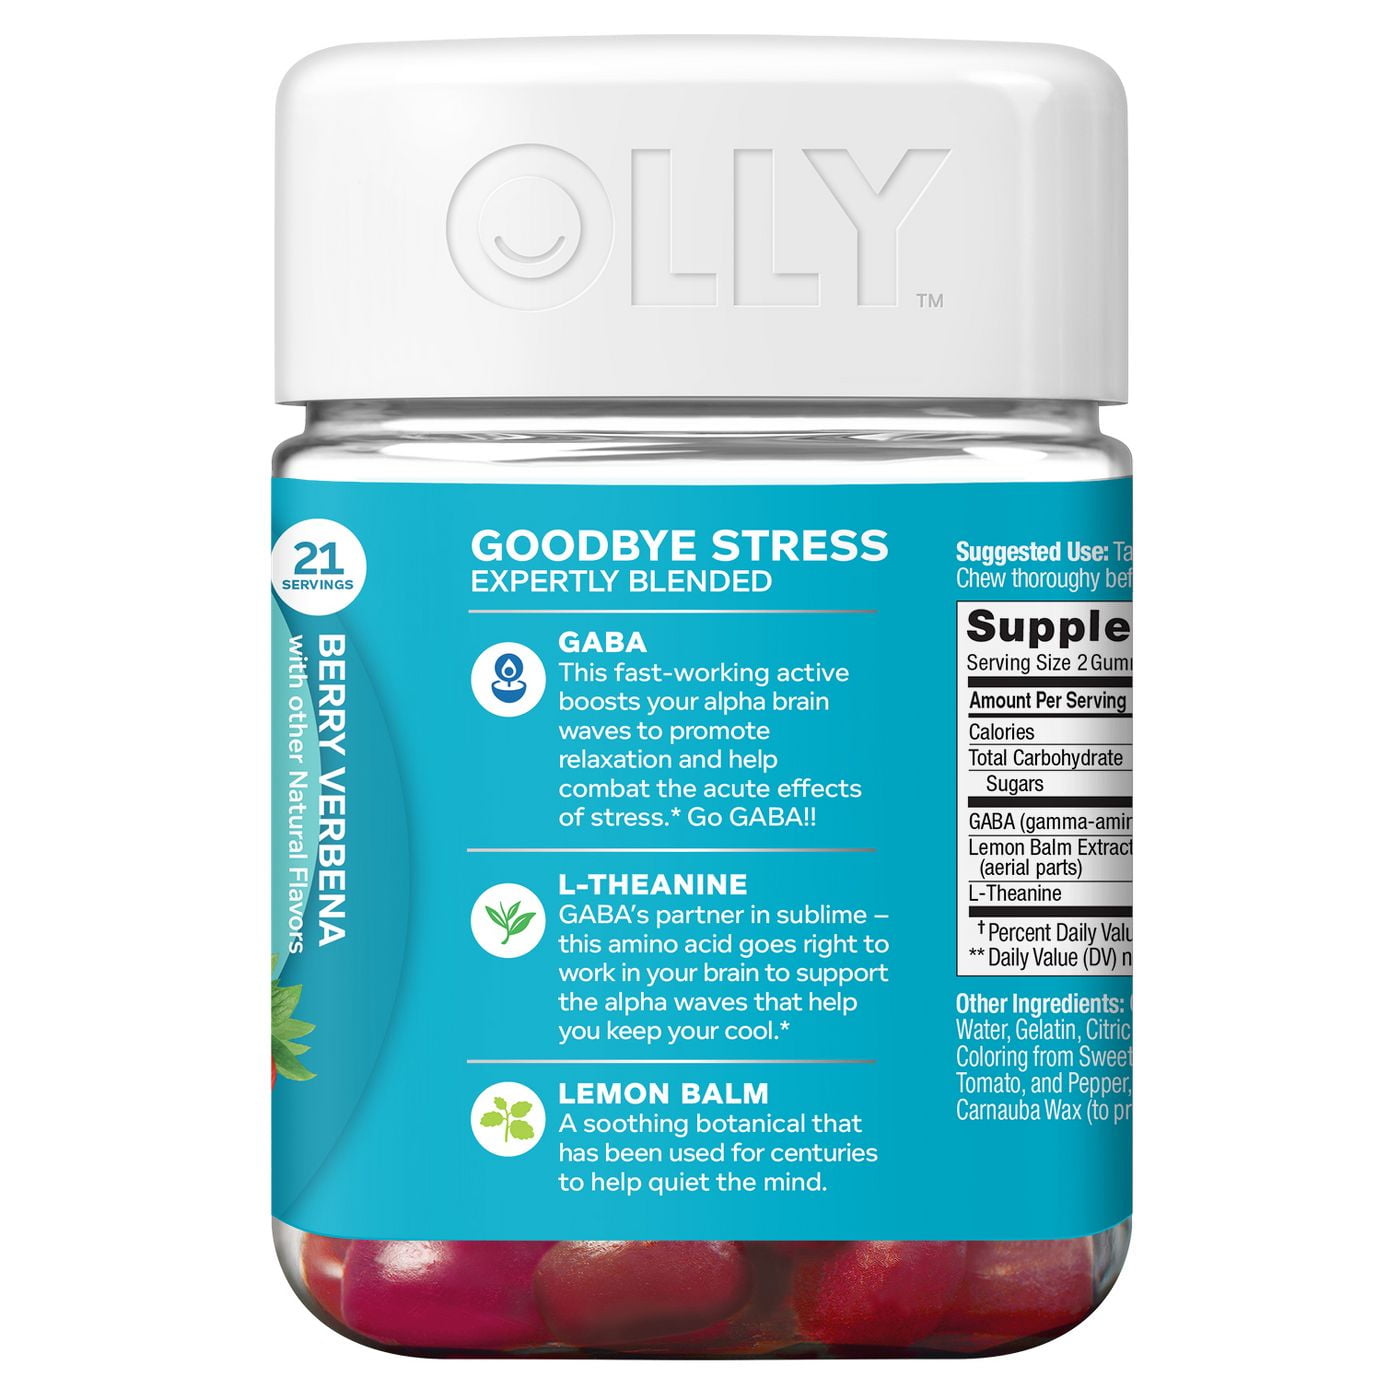 olly goodbye stress suggested dosage